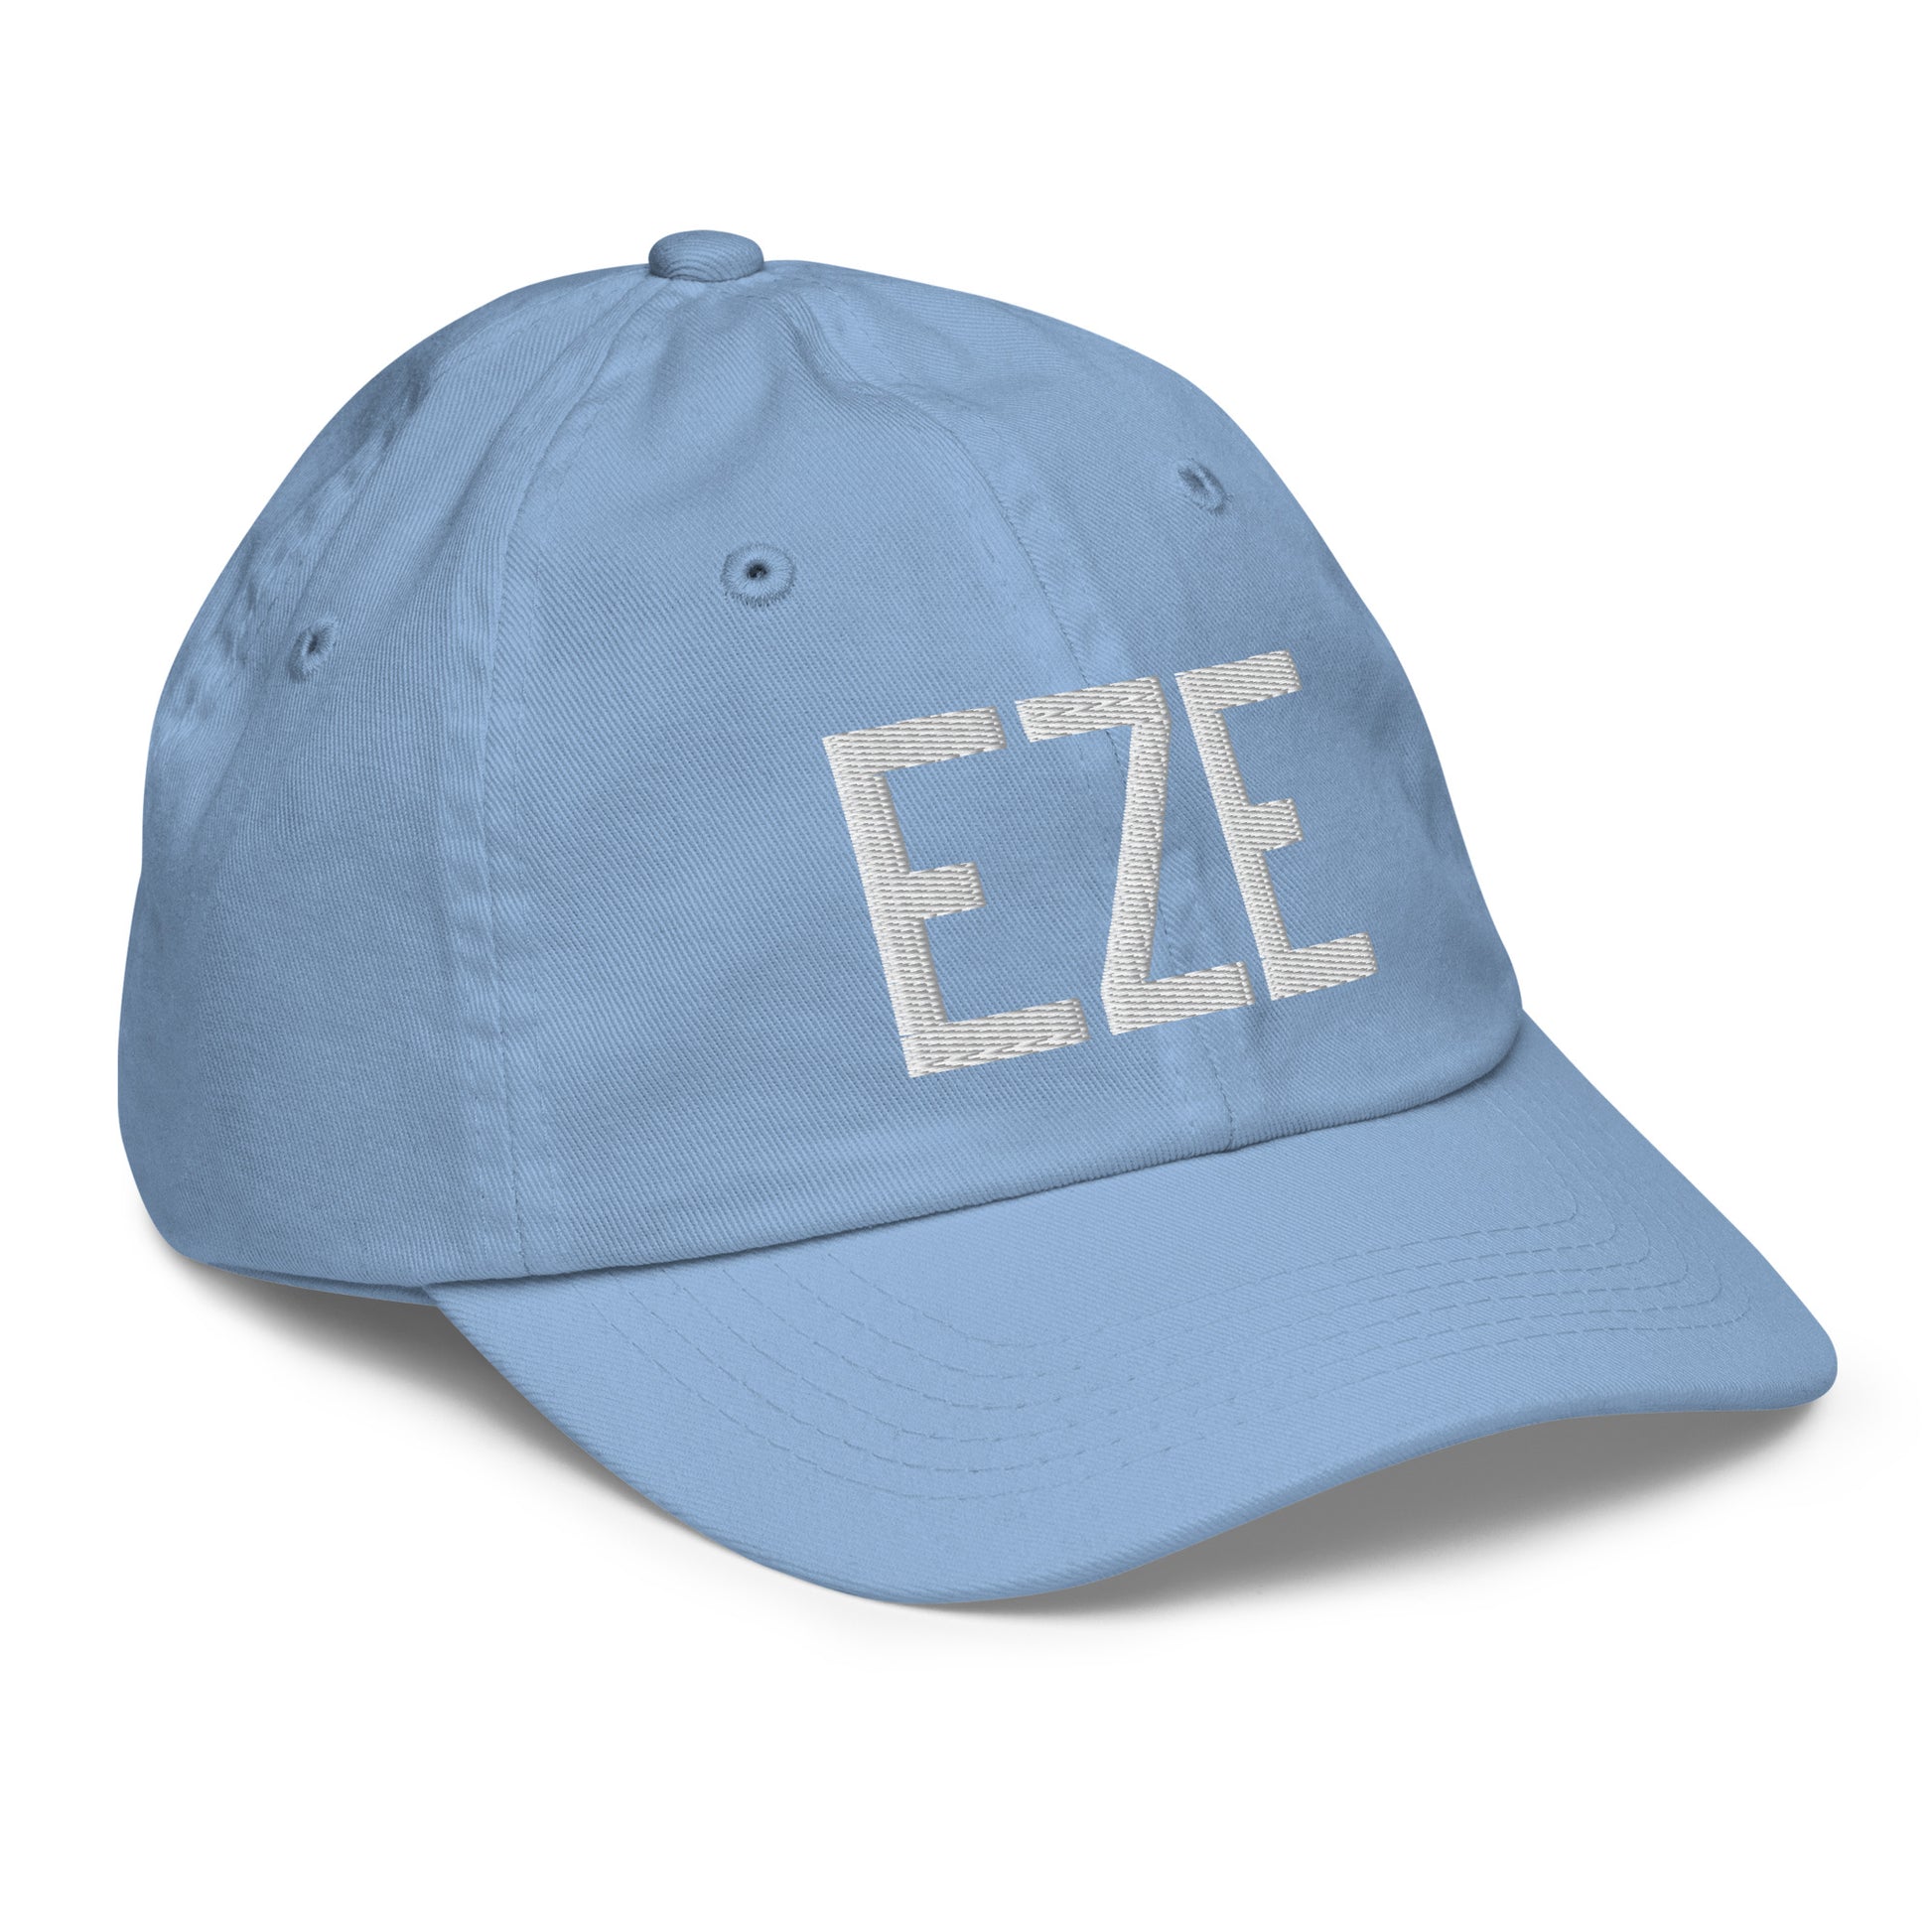 Airport Code Kid's Baseball Cap - White • EZE Buenos Aires • YHM Designs - Image 23